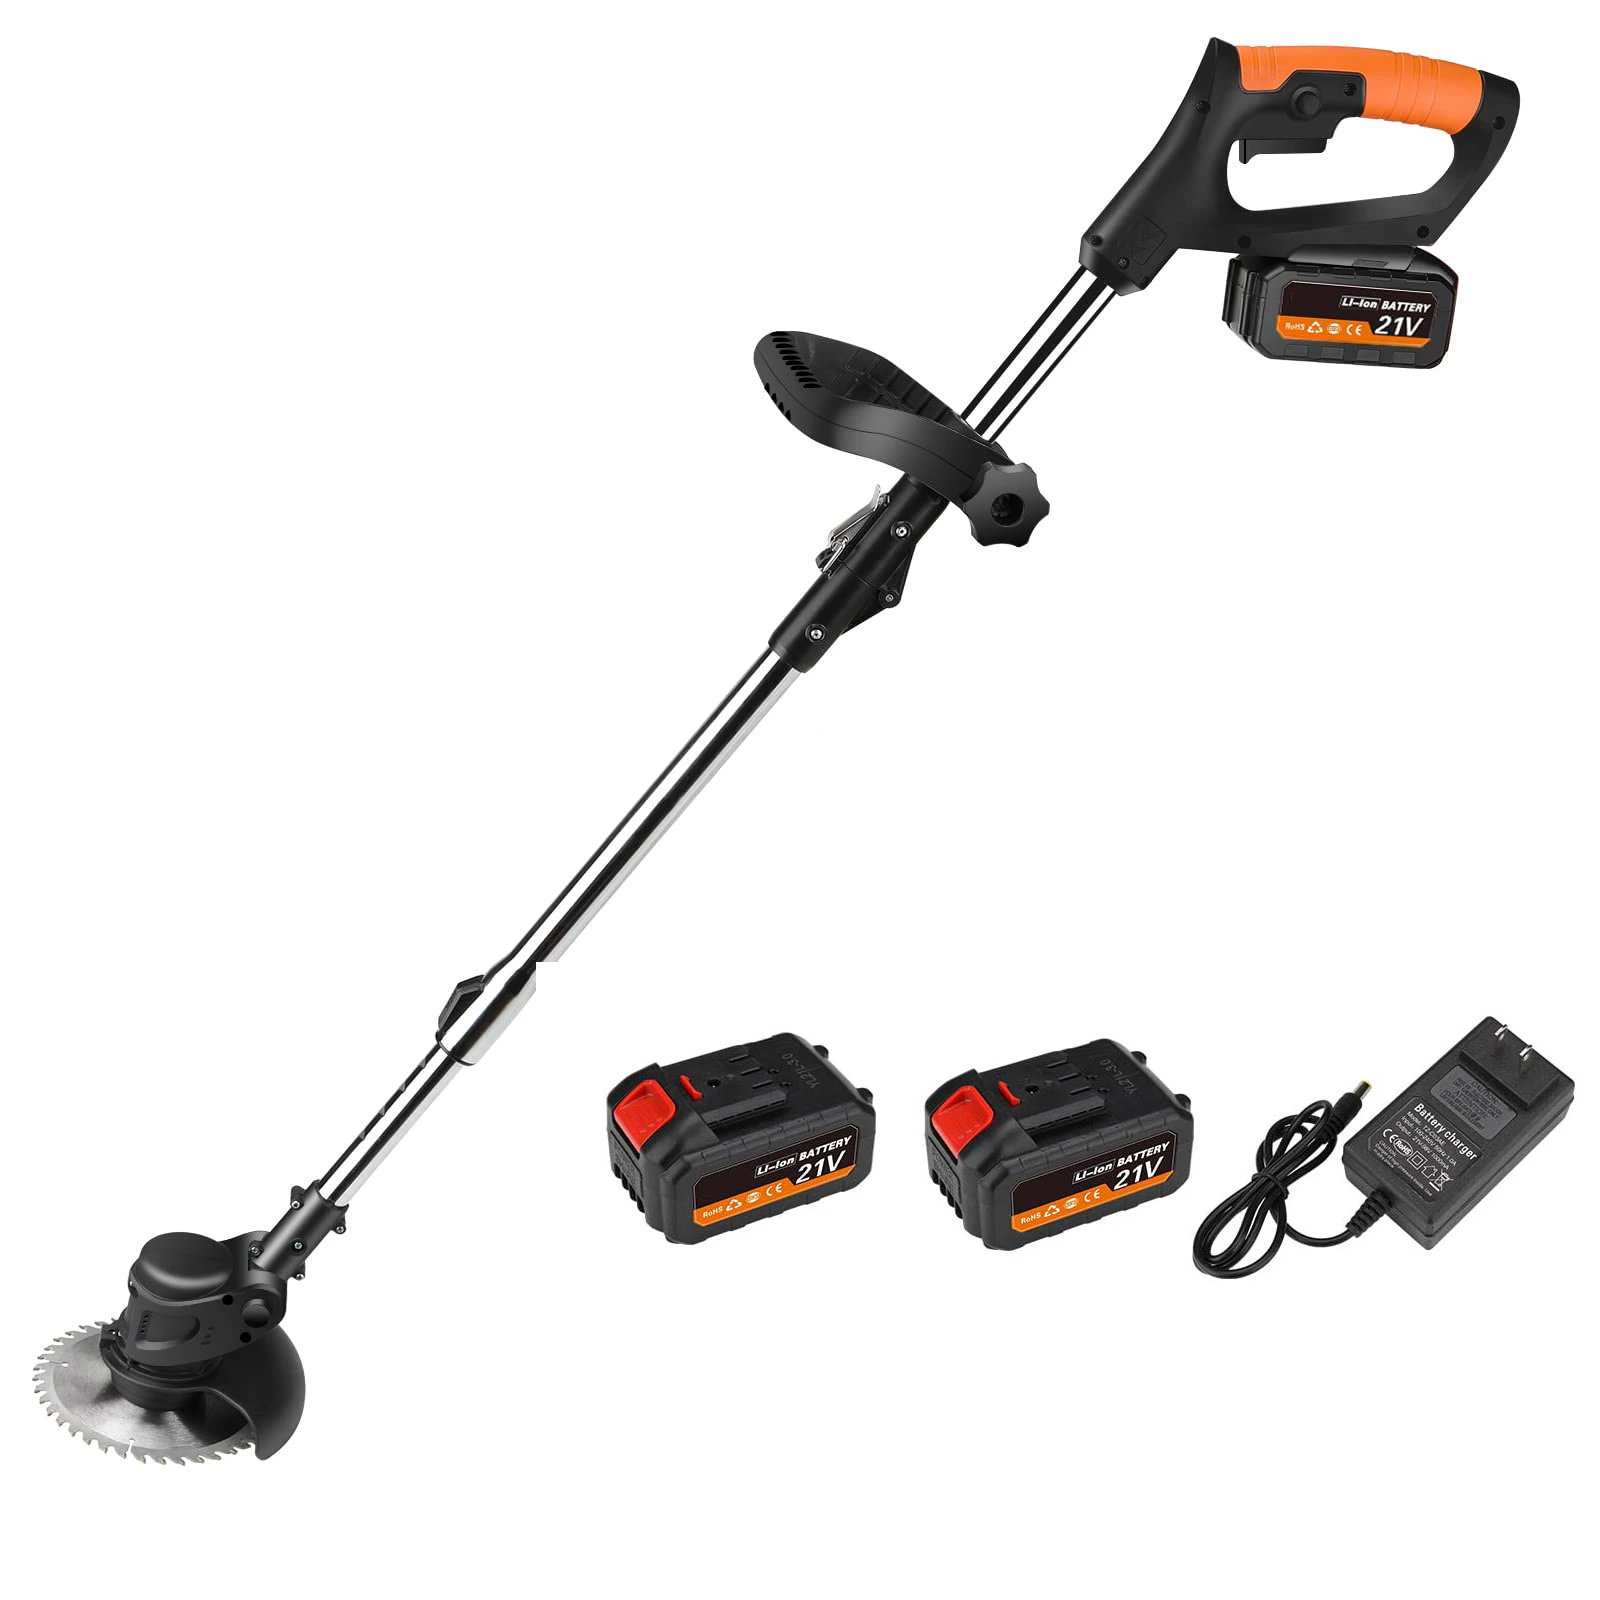 Weed Wacker Electric Weed Wacker Cordless Trimmer Retractable and Foldable Home Weed Eater Brush Cutter Portable Battery Powered